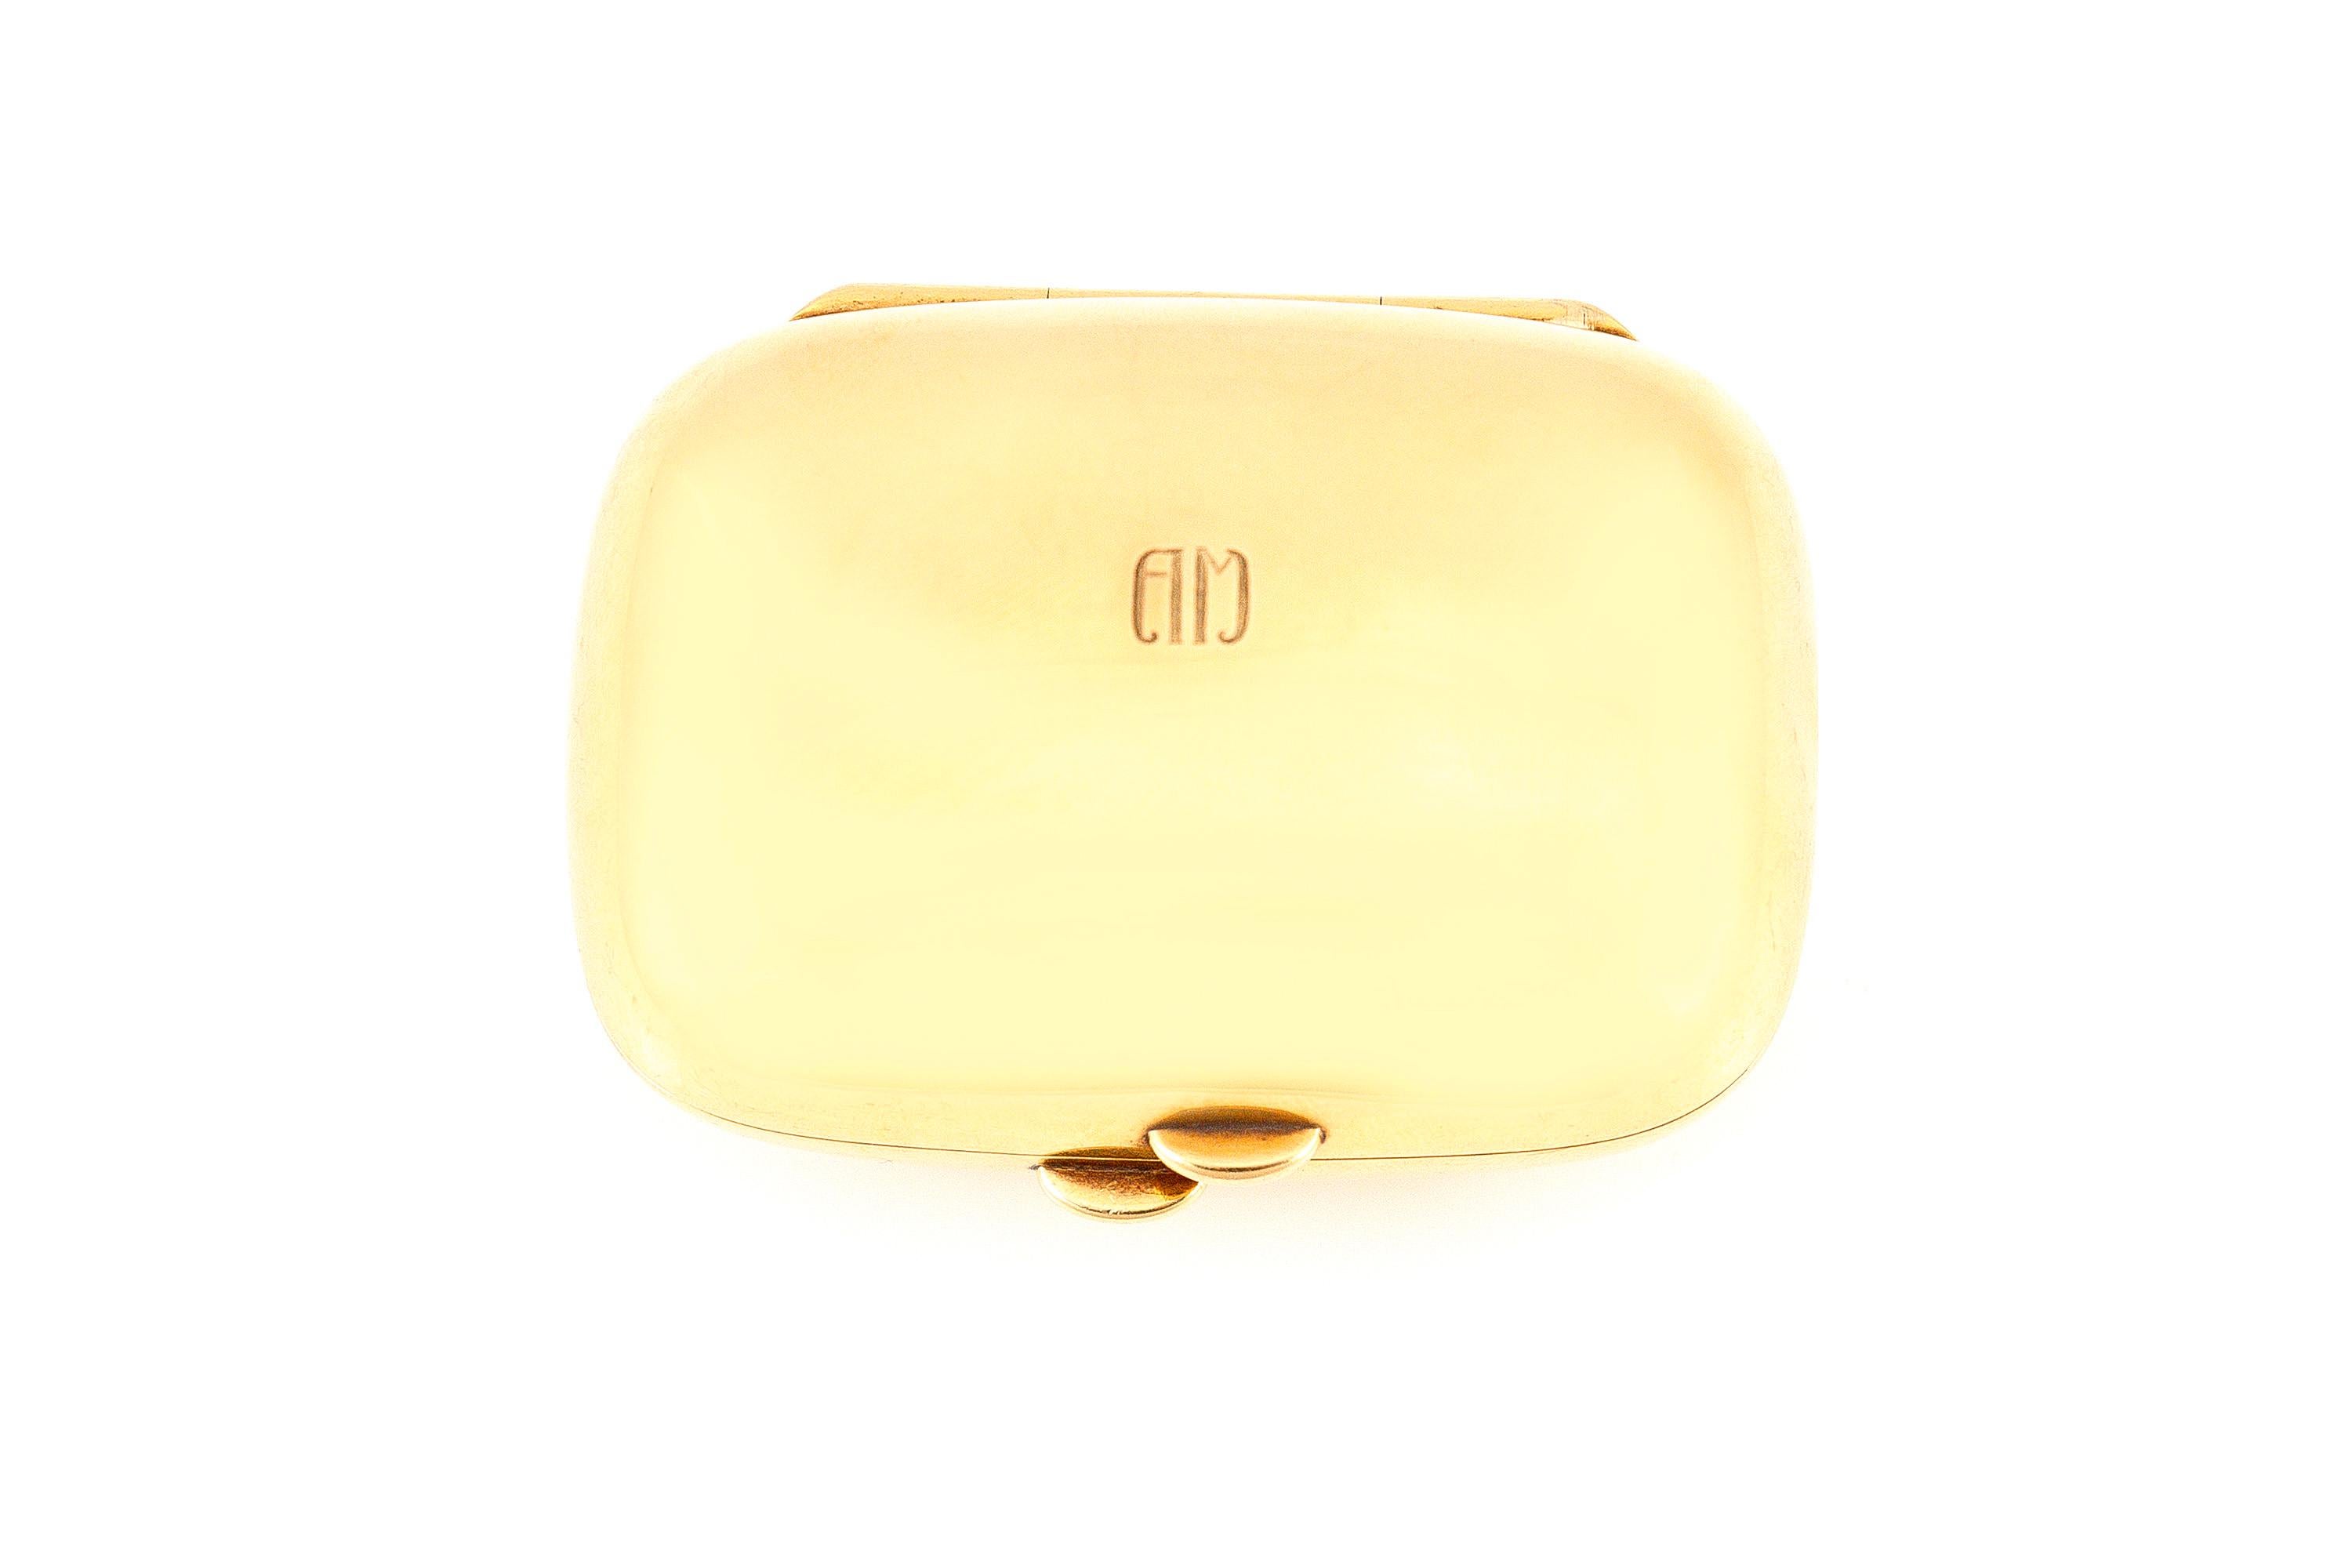 The box is finely crafted in 18k yellow gold and weighing approximately total of 47.3 dwt.

Sign by Tiffany & Co